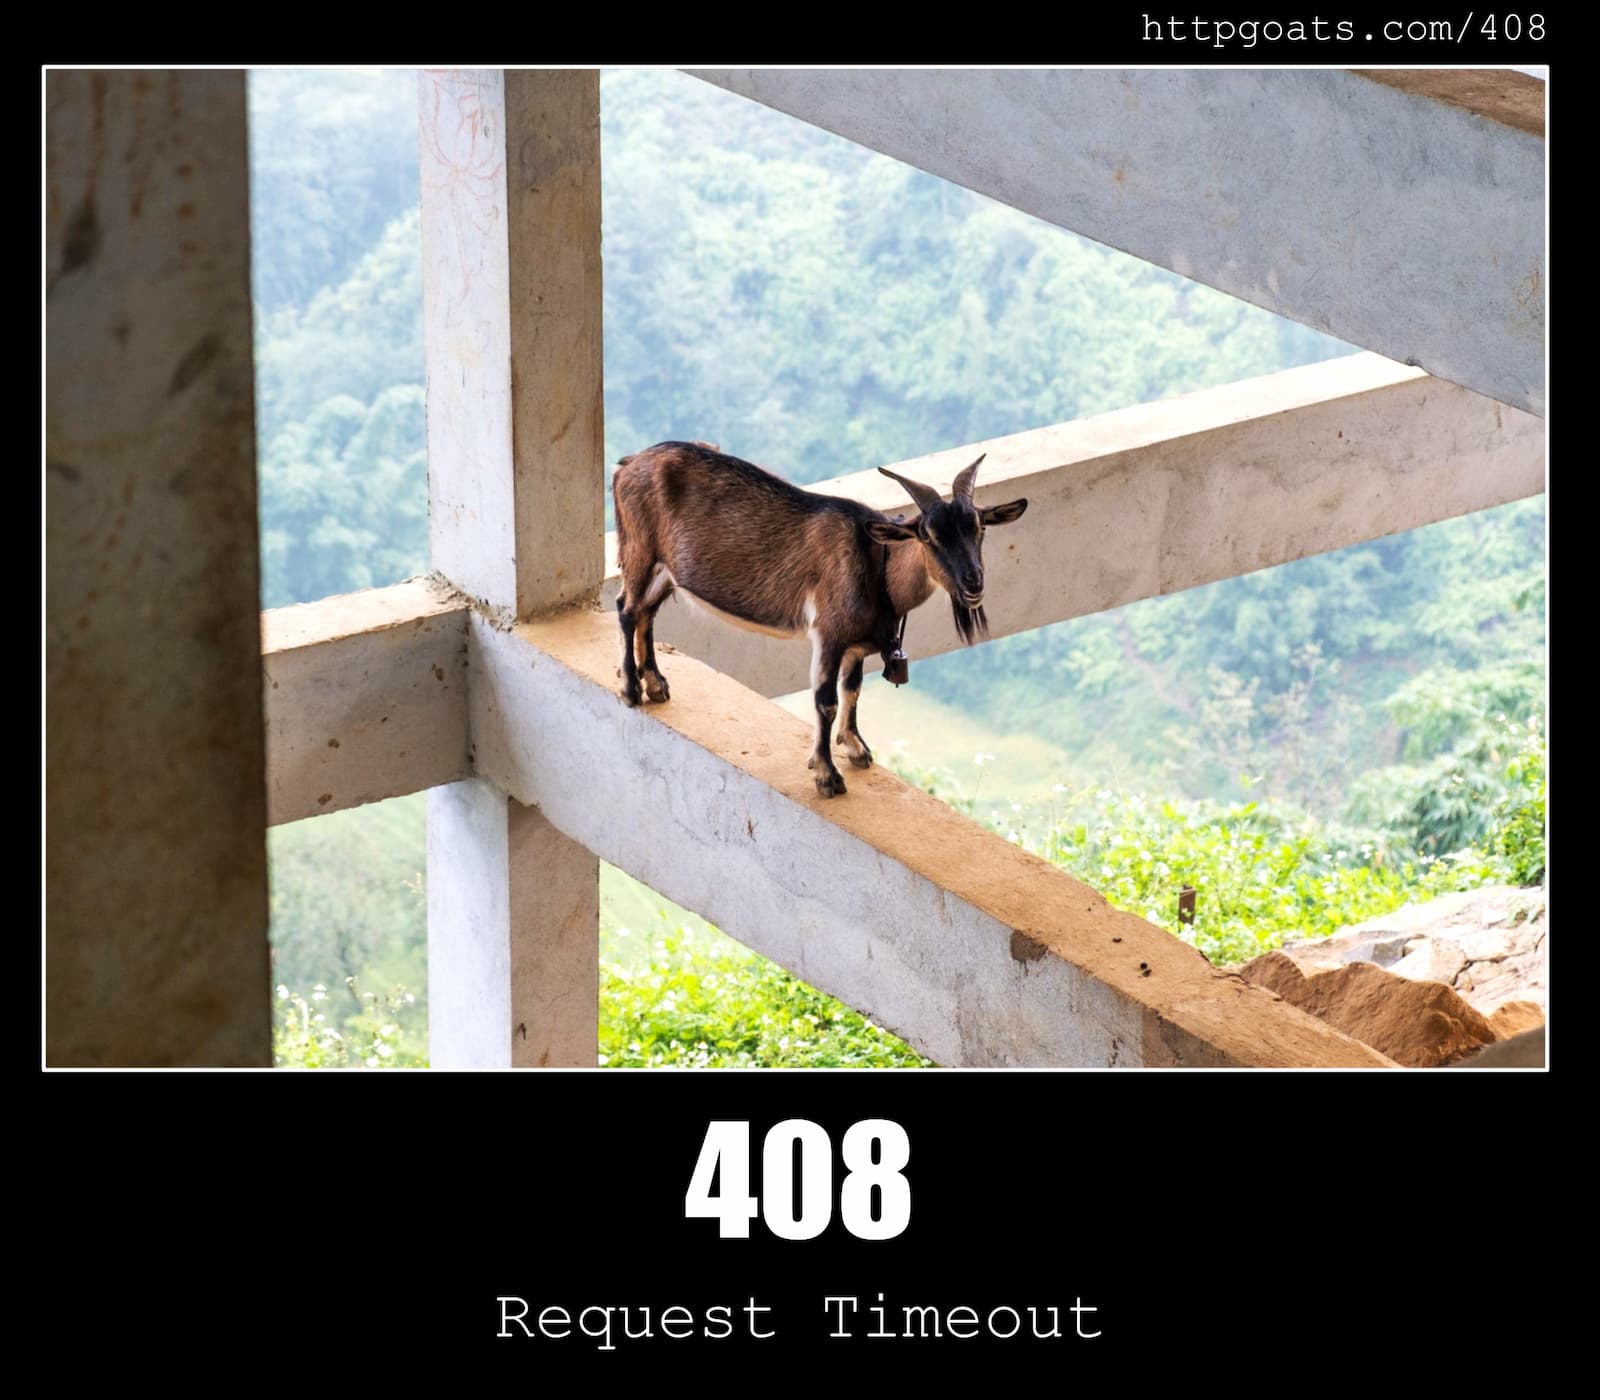 HTTP Status Code 408 Request Timeout & Goats